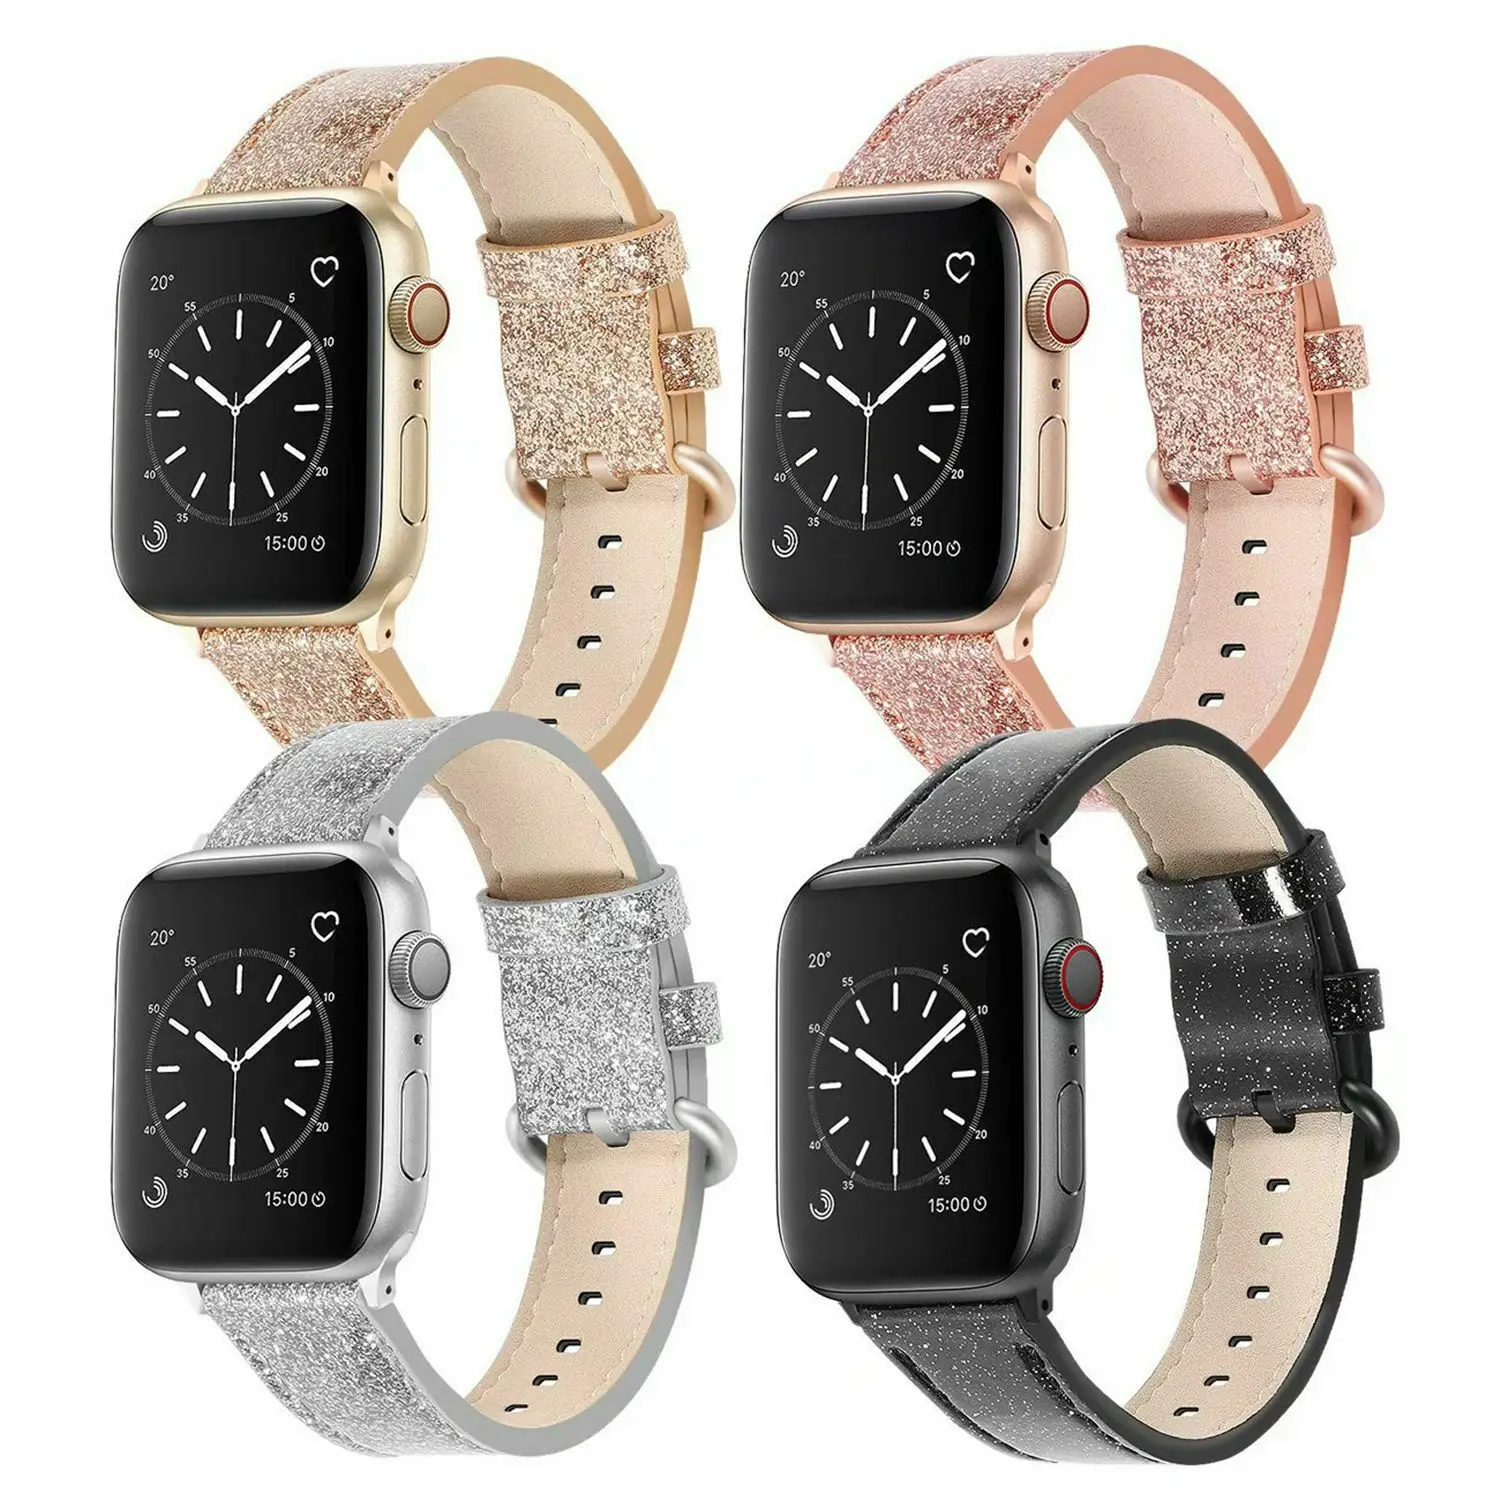 Glitter Leather Classic Watch Strap For Apple Watch Series 1 2 3 4 5 Band Women Bracelet For 42/44mm 38/40mm iWatch Straps